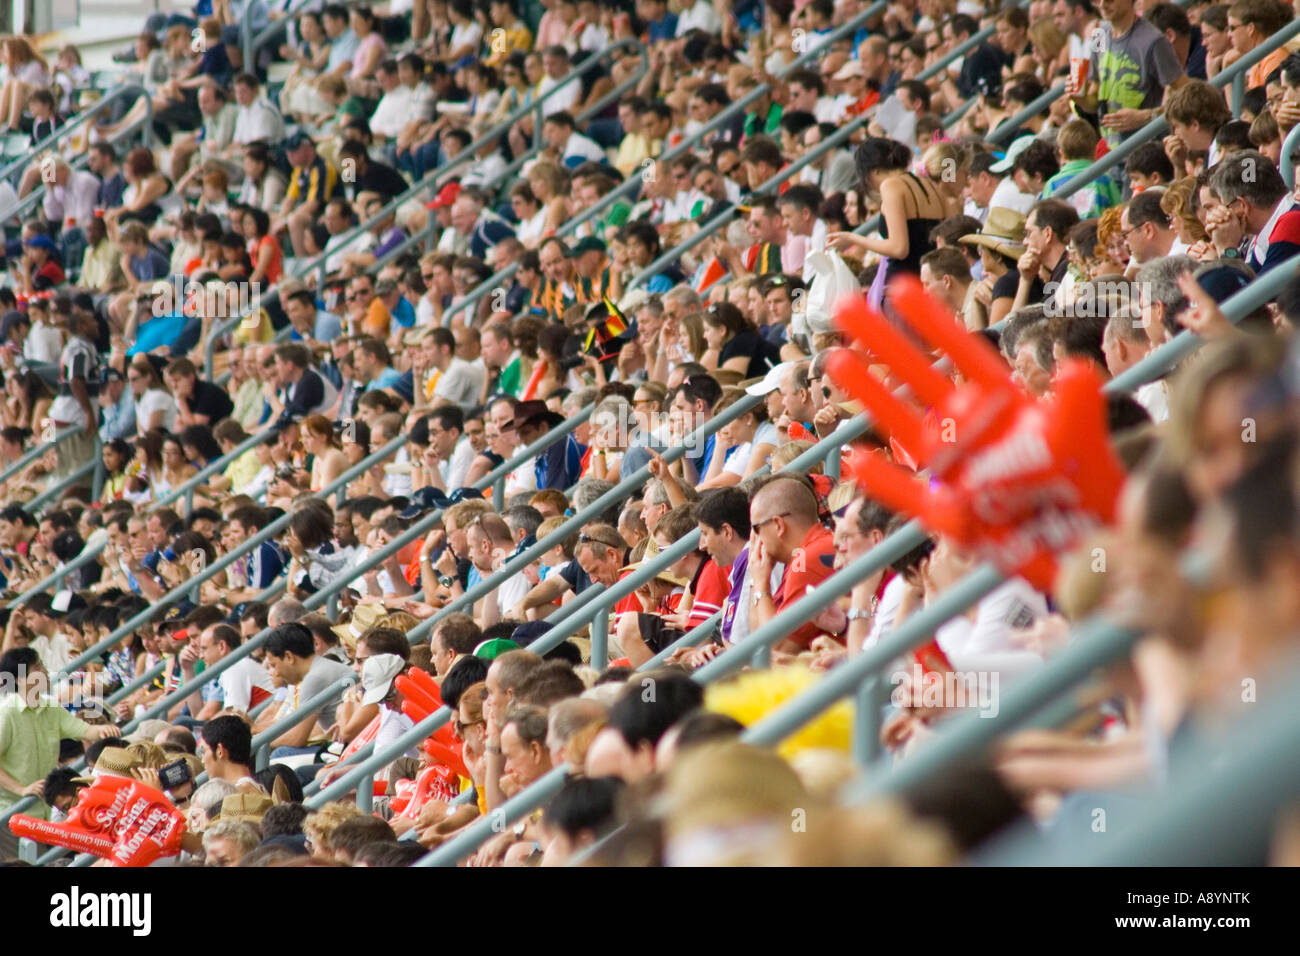 Crowded Grandstands Rugby Sevens Hong Kong 2007 Stock Photo